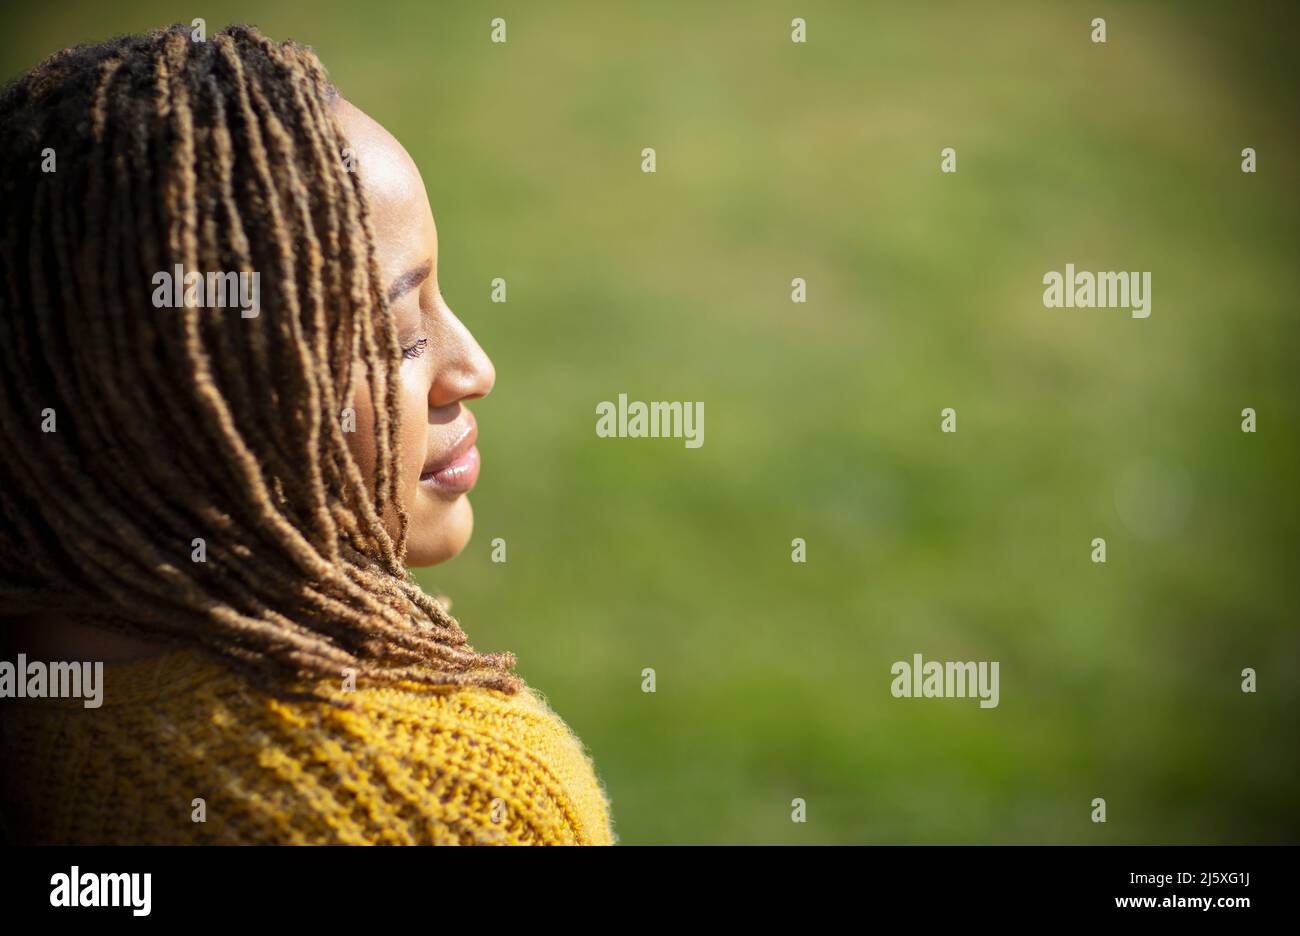 Serene young woman basking in sunlight with eyes closed Stock Photo